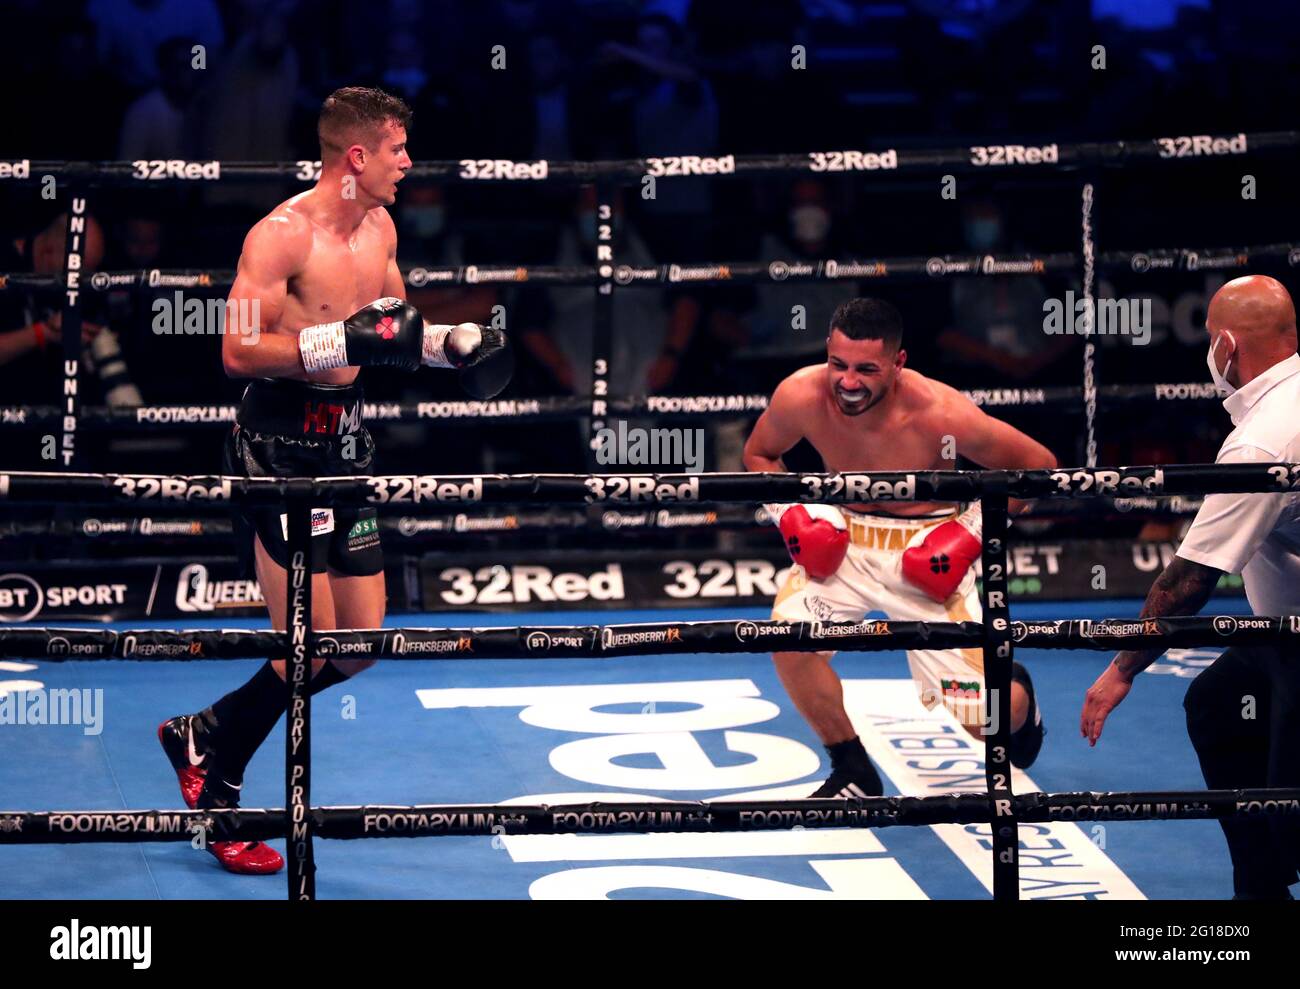 Nathan Heaney (left) knocks down Iliyan Markov in the International Middleweight Contest during the Boxing event at the Telford International Centre, Telford. Picture date: Saturday June 5, 2021. Stock Photo